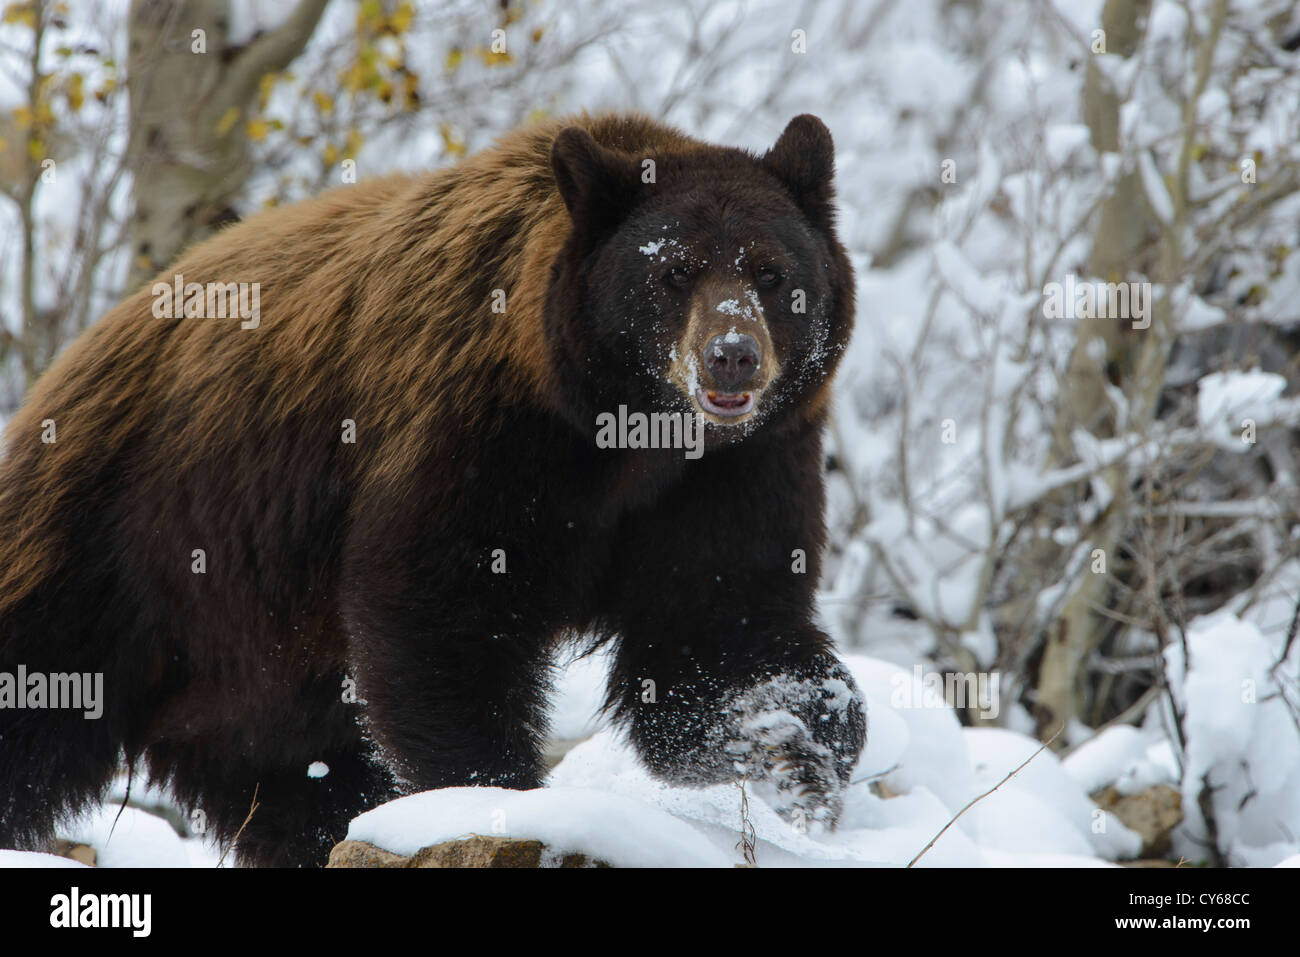 A black bear sow marches through wet snow from an early Autumn snowfall, Northern Rockies Stock Photo